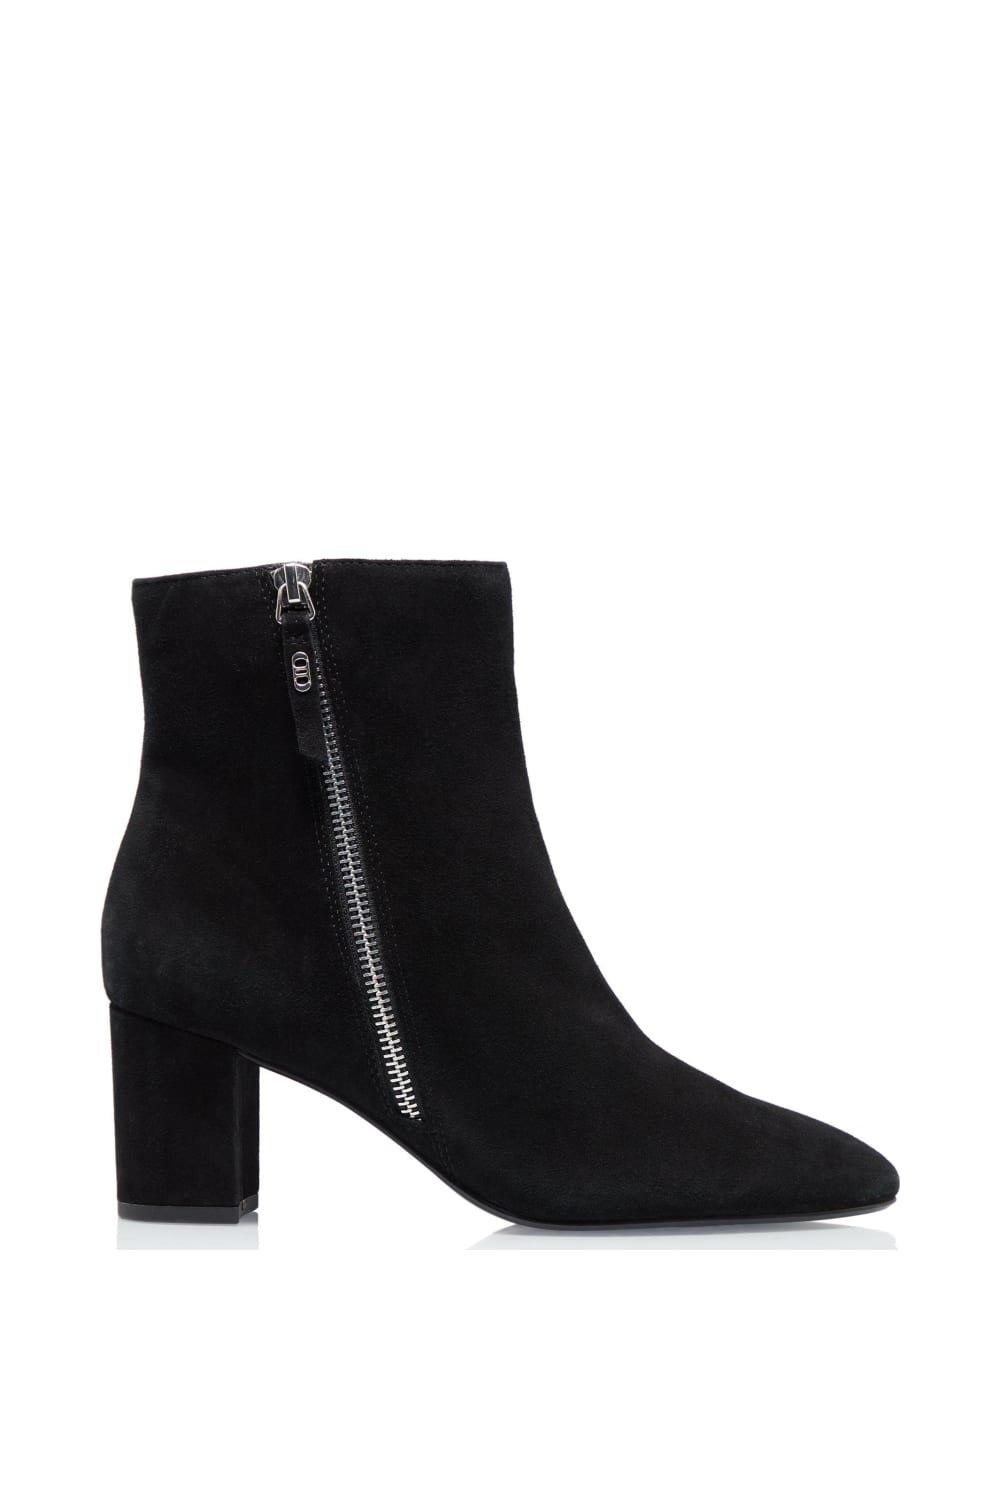 Boots | 'Oricle' Suede Ankle Boots | Dune London